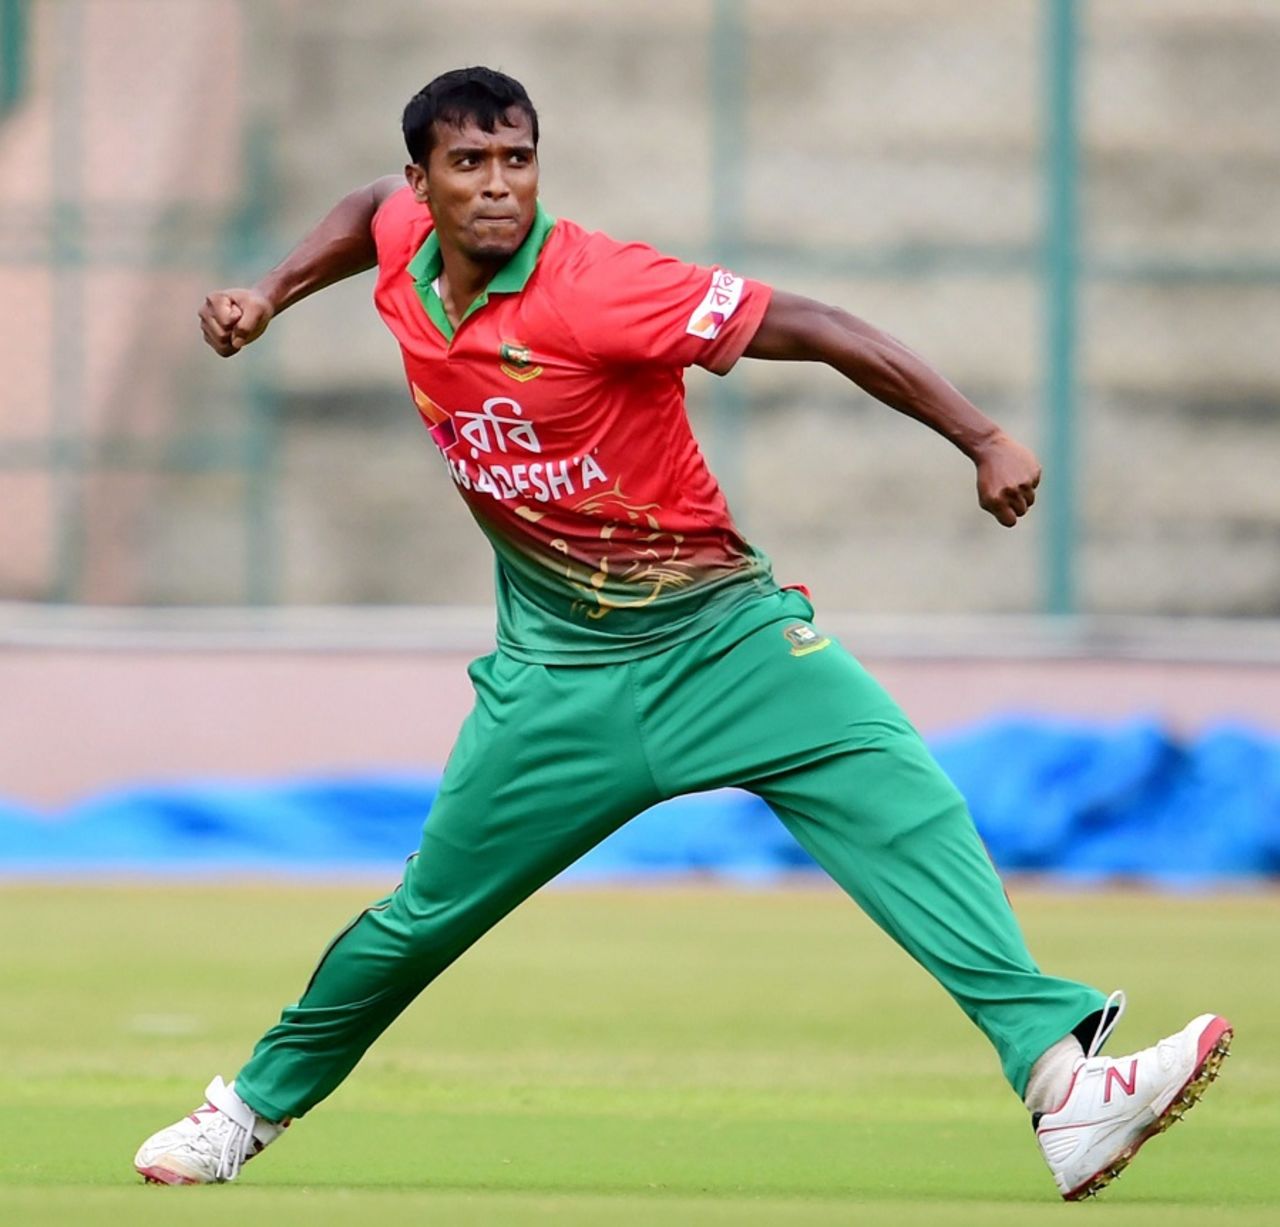 Rubel Hossain claimed four wickets, India A v Bangladesh A, 2nd unofficial ODI, Bangalore, September 18, 2015